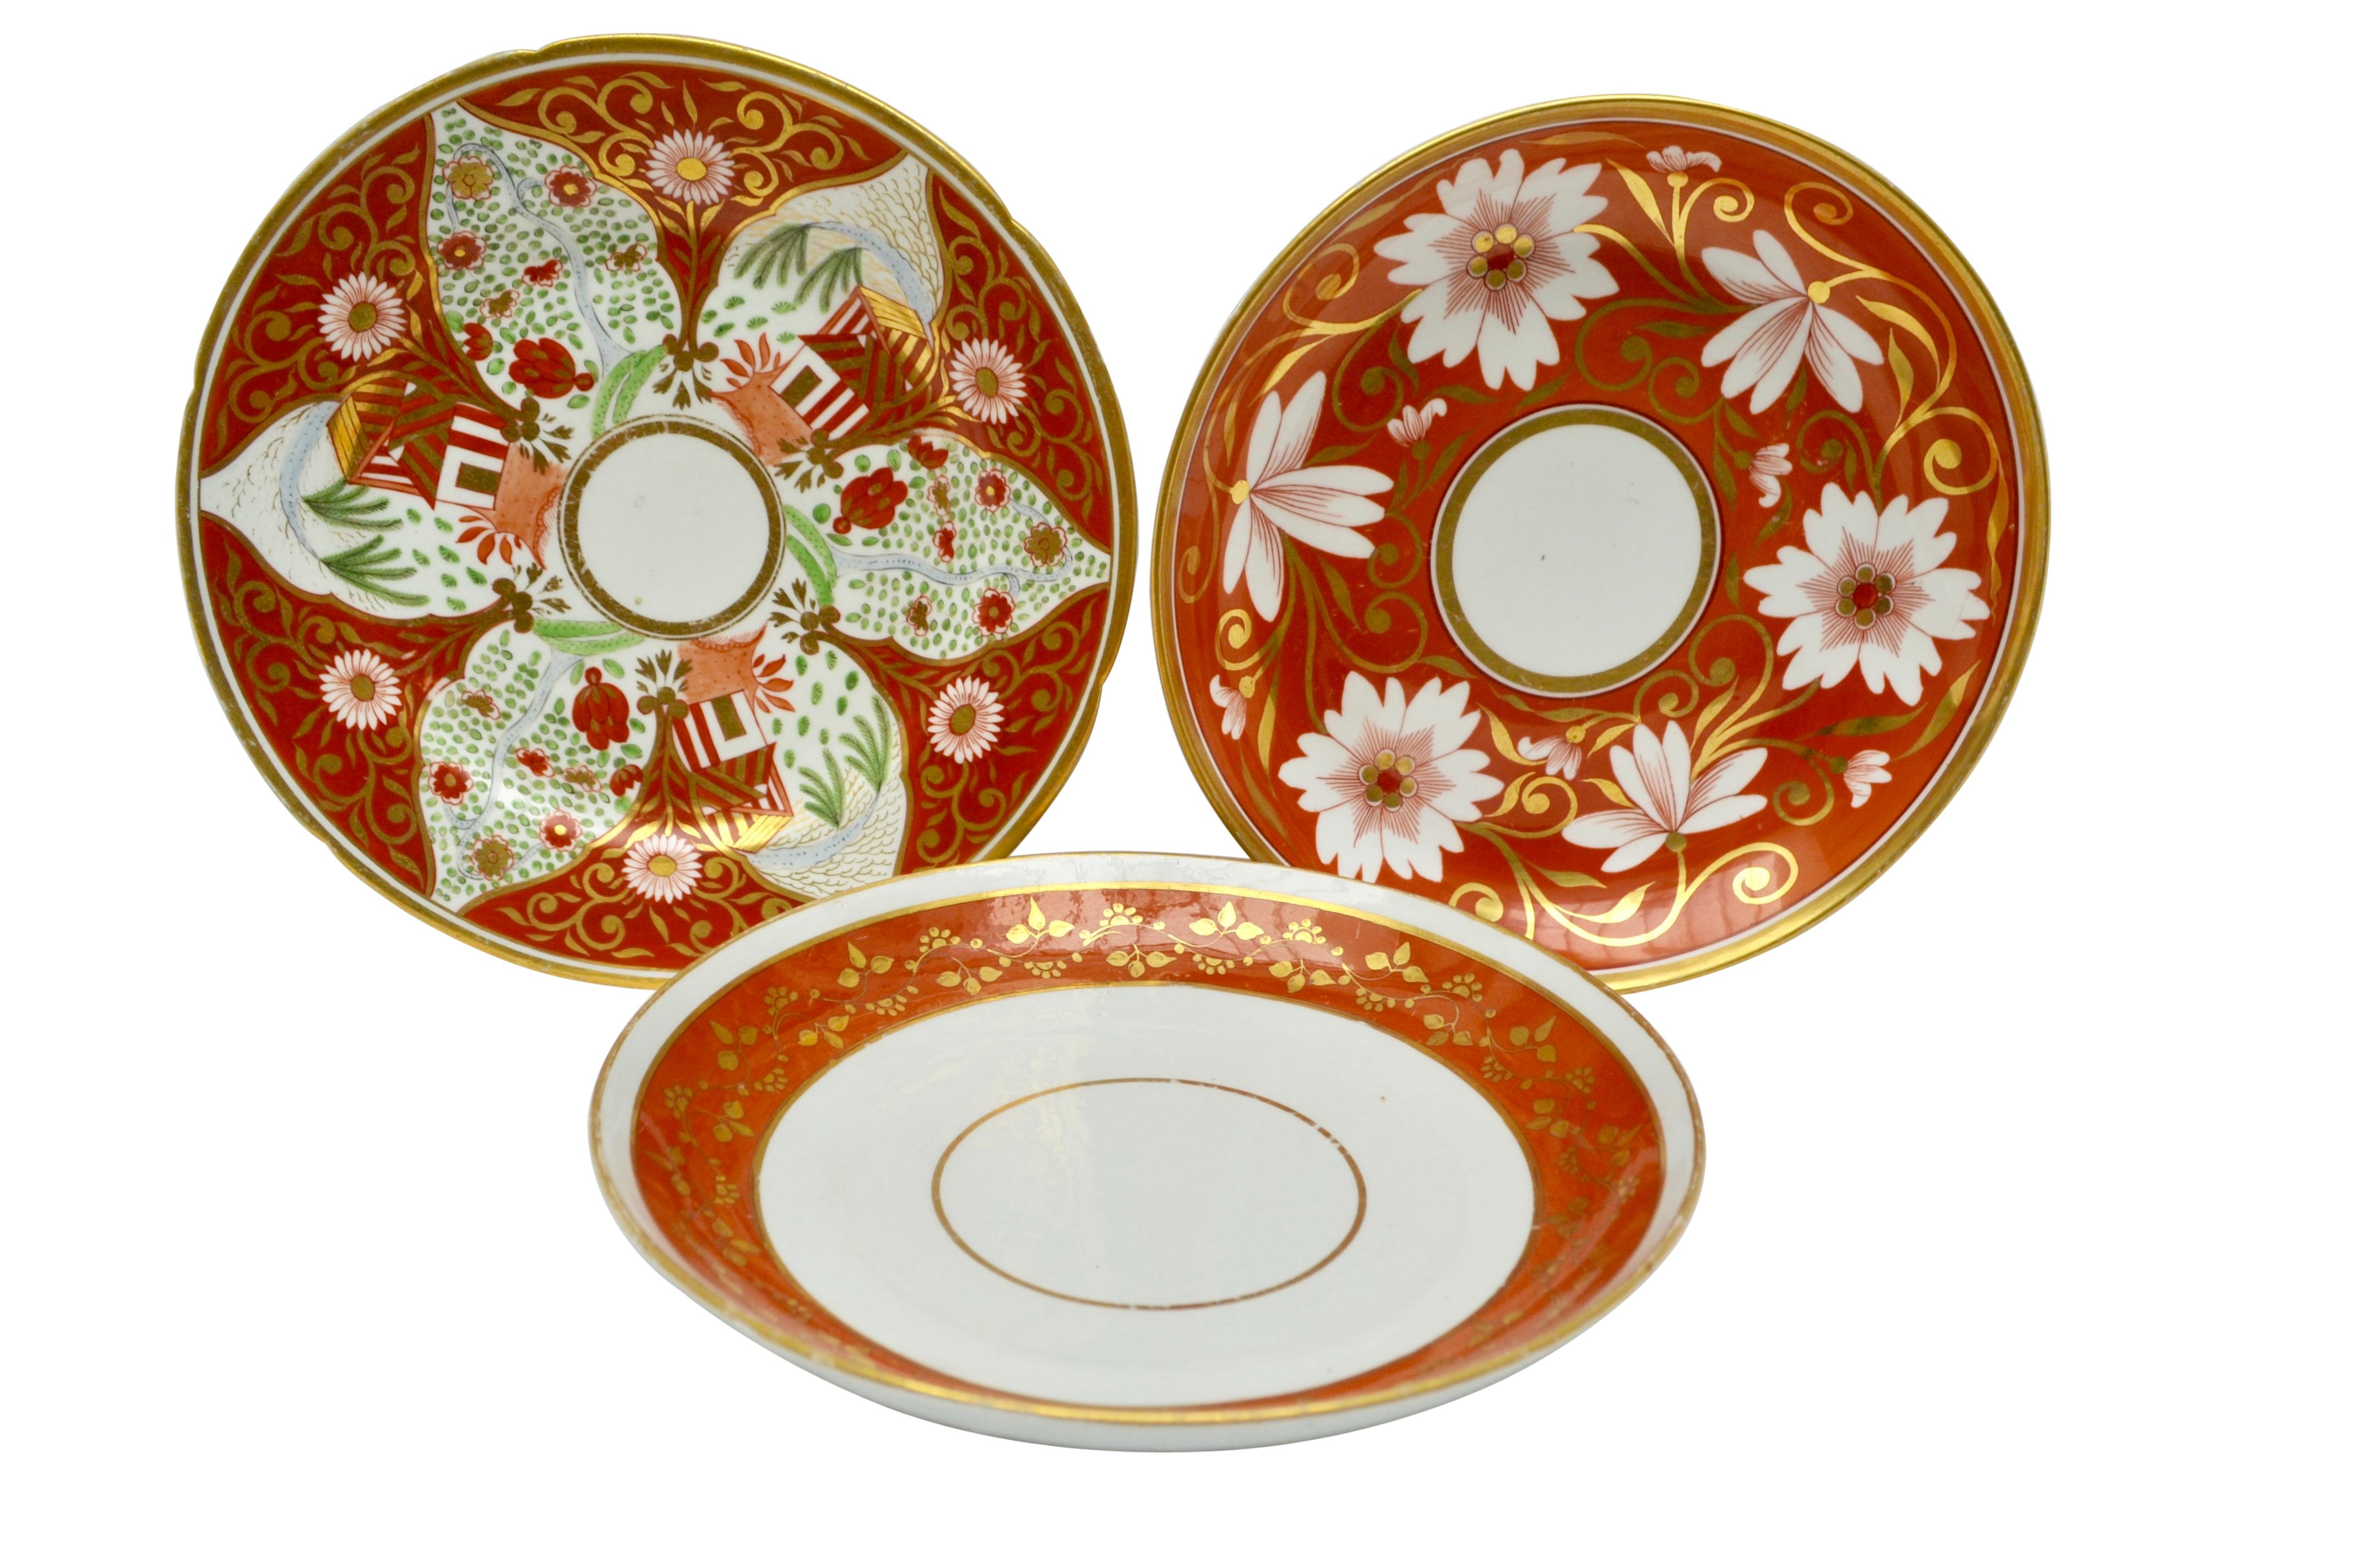 Regency Set of Three Early 19th Century English Coral and Gold Porcelain Plates